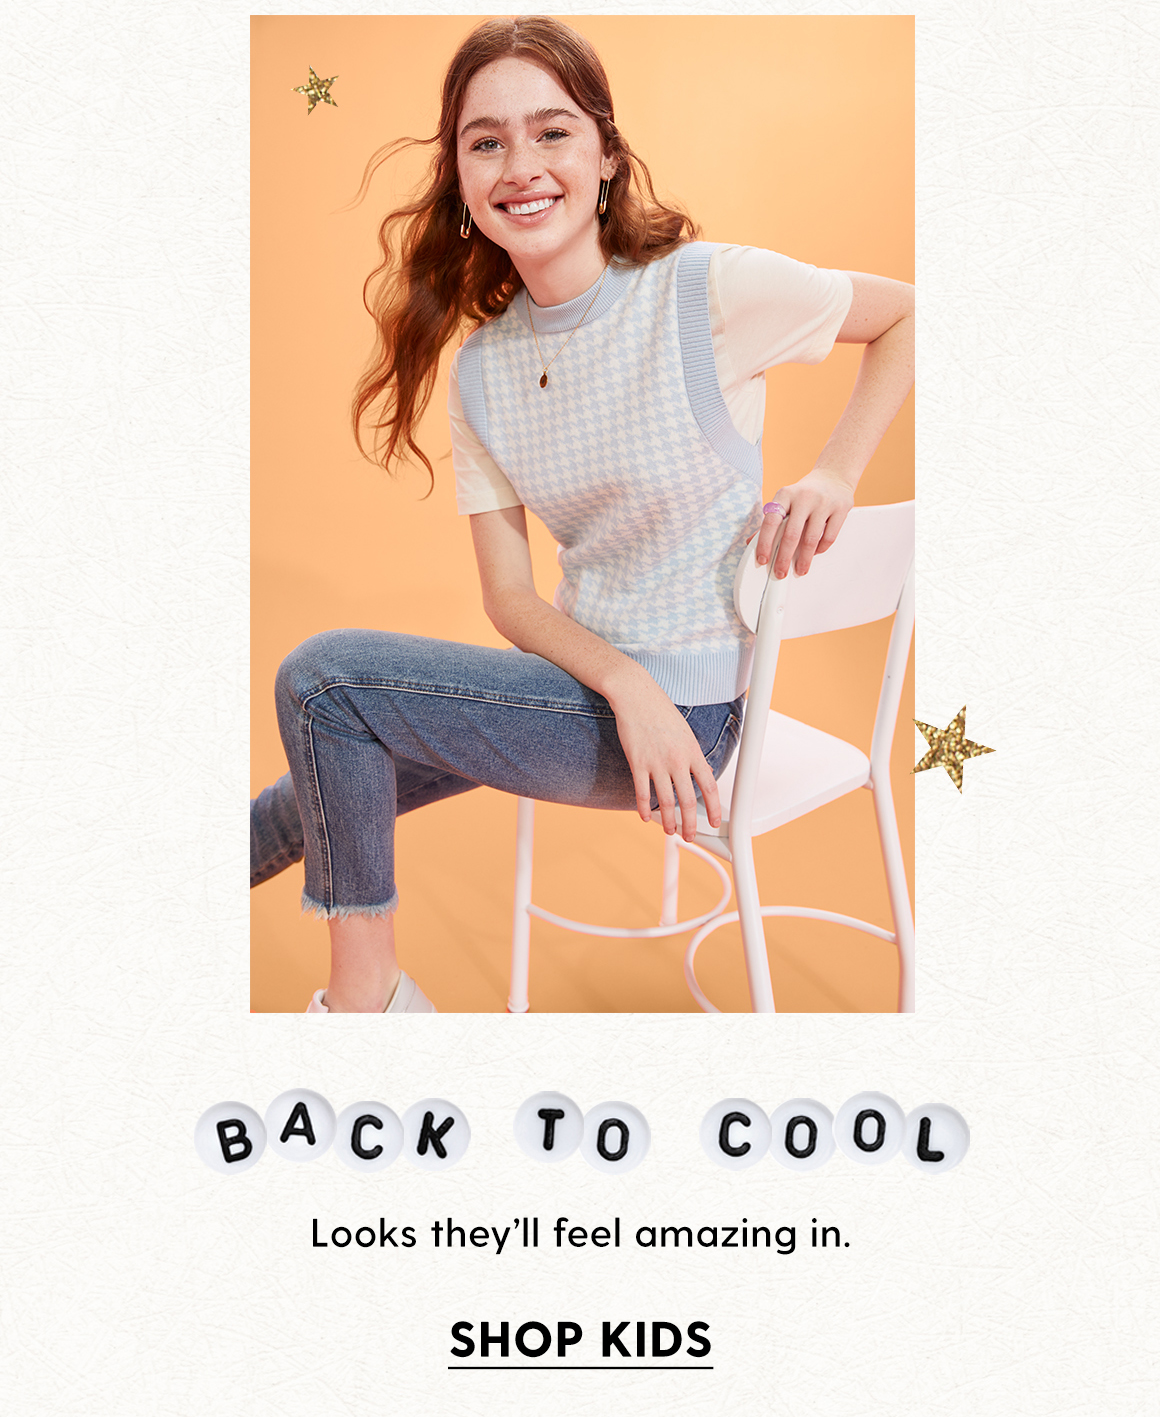 Back to cool - looks they'll feel amazing in. Shop Kids